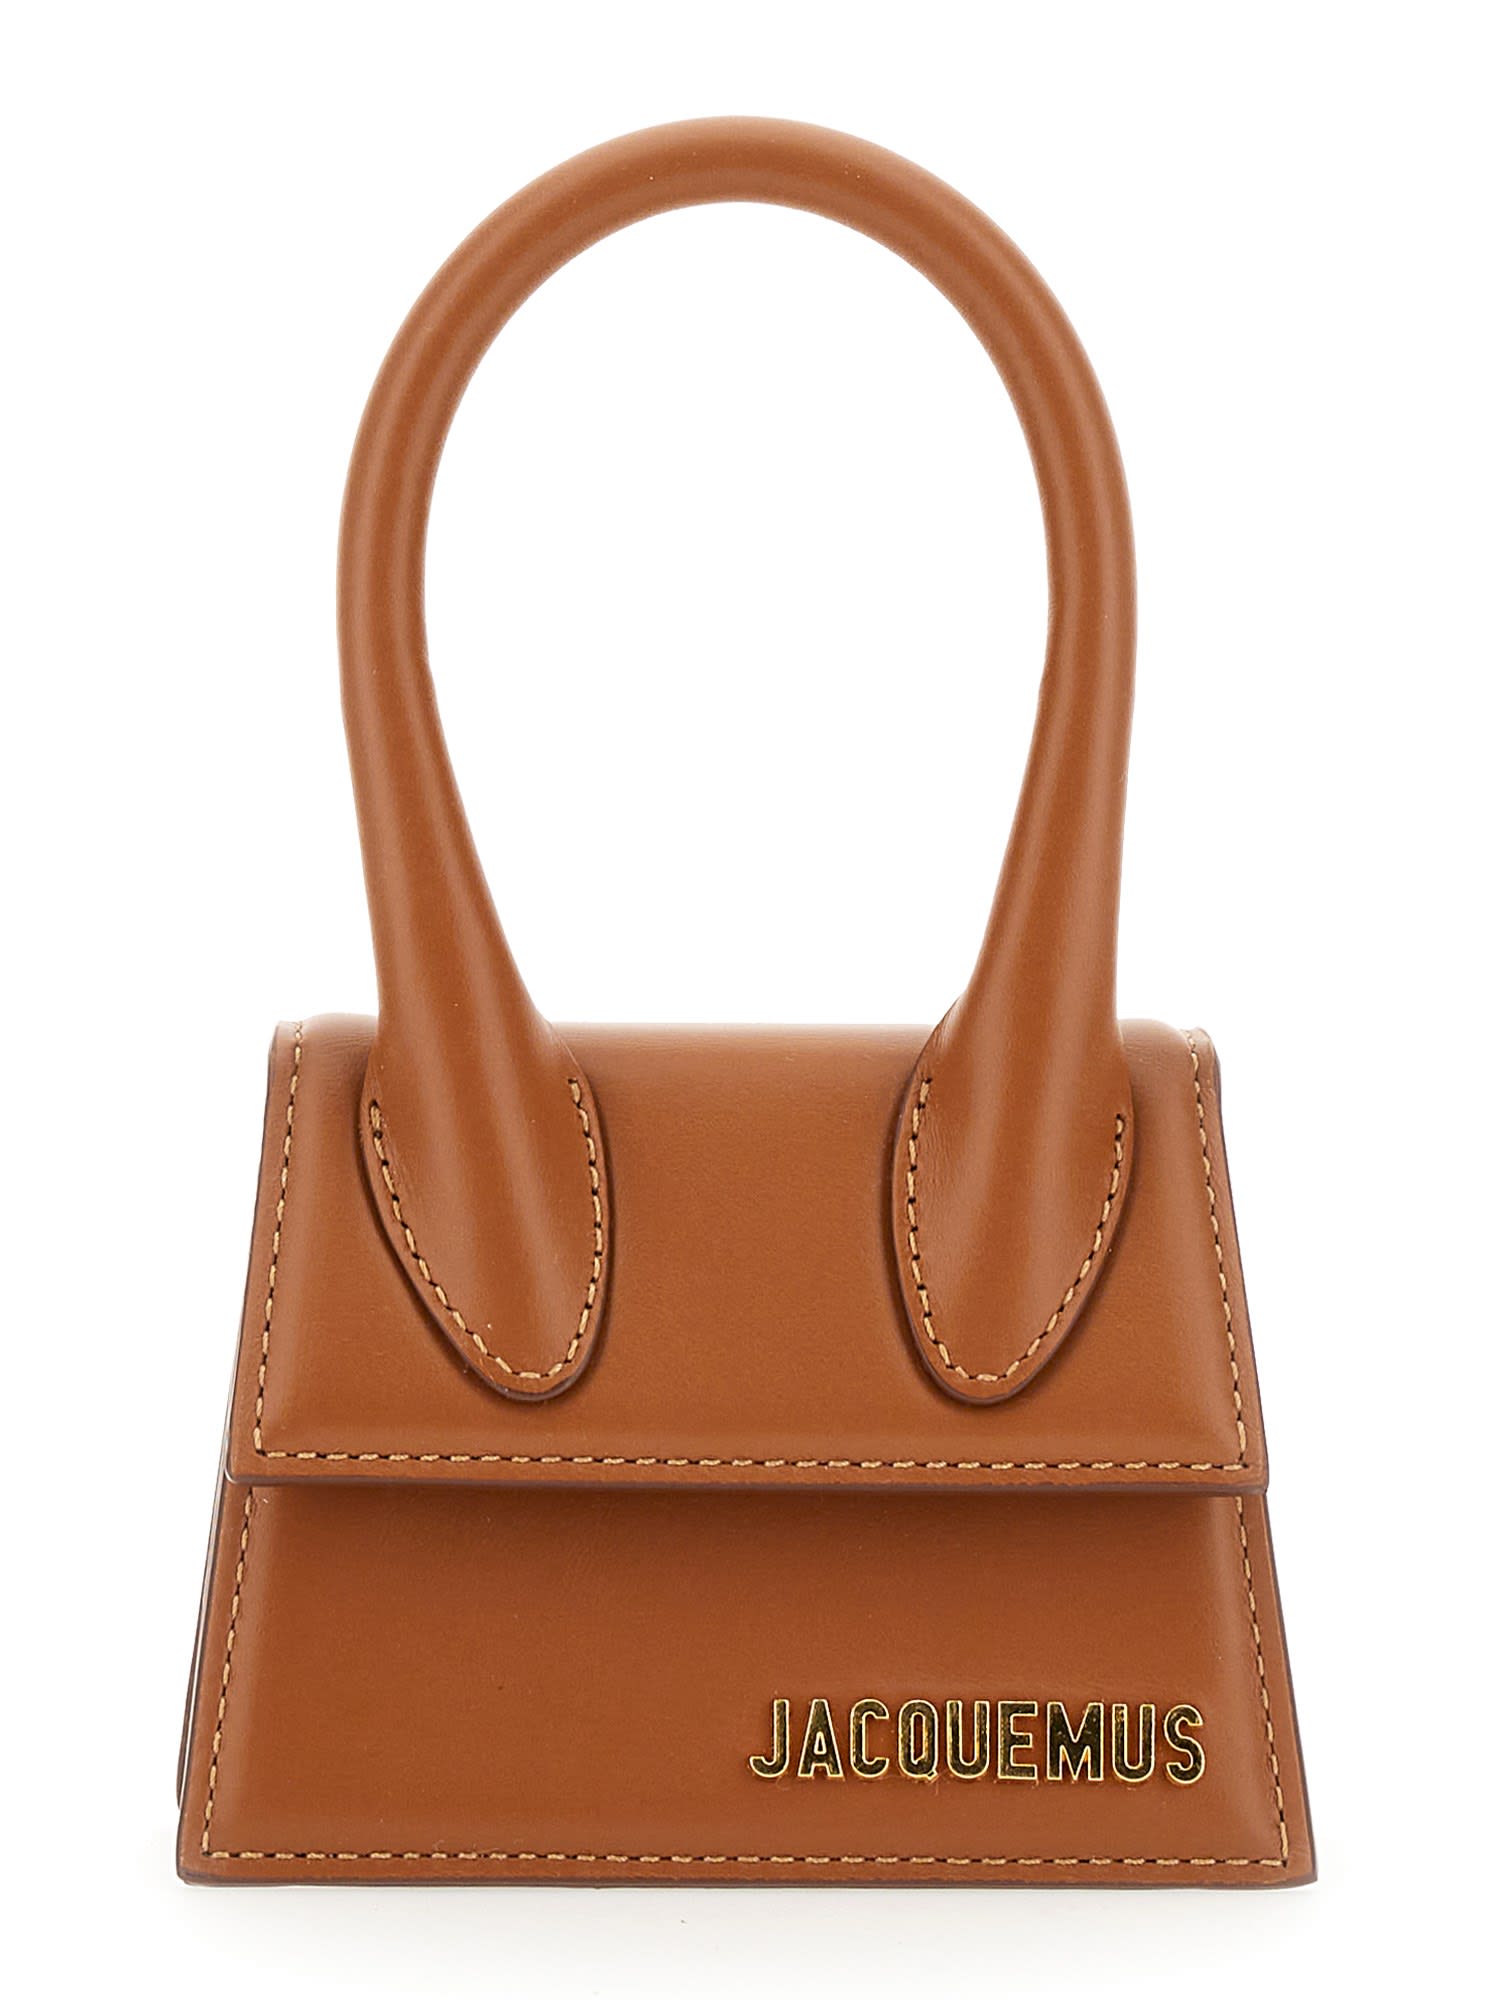 Jacquemus Le Chiquito Bag In Leather Brown